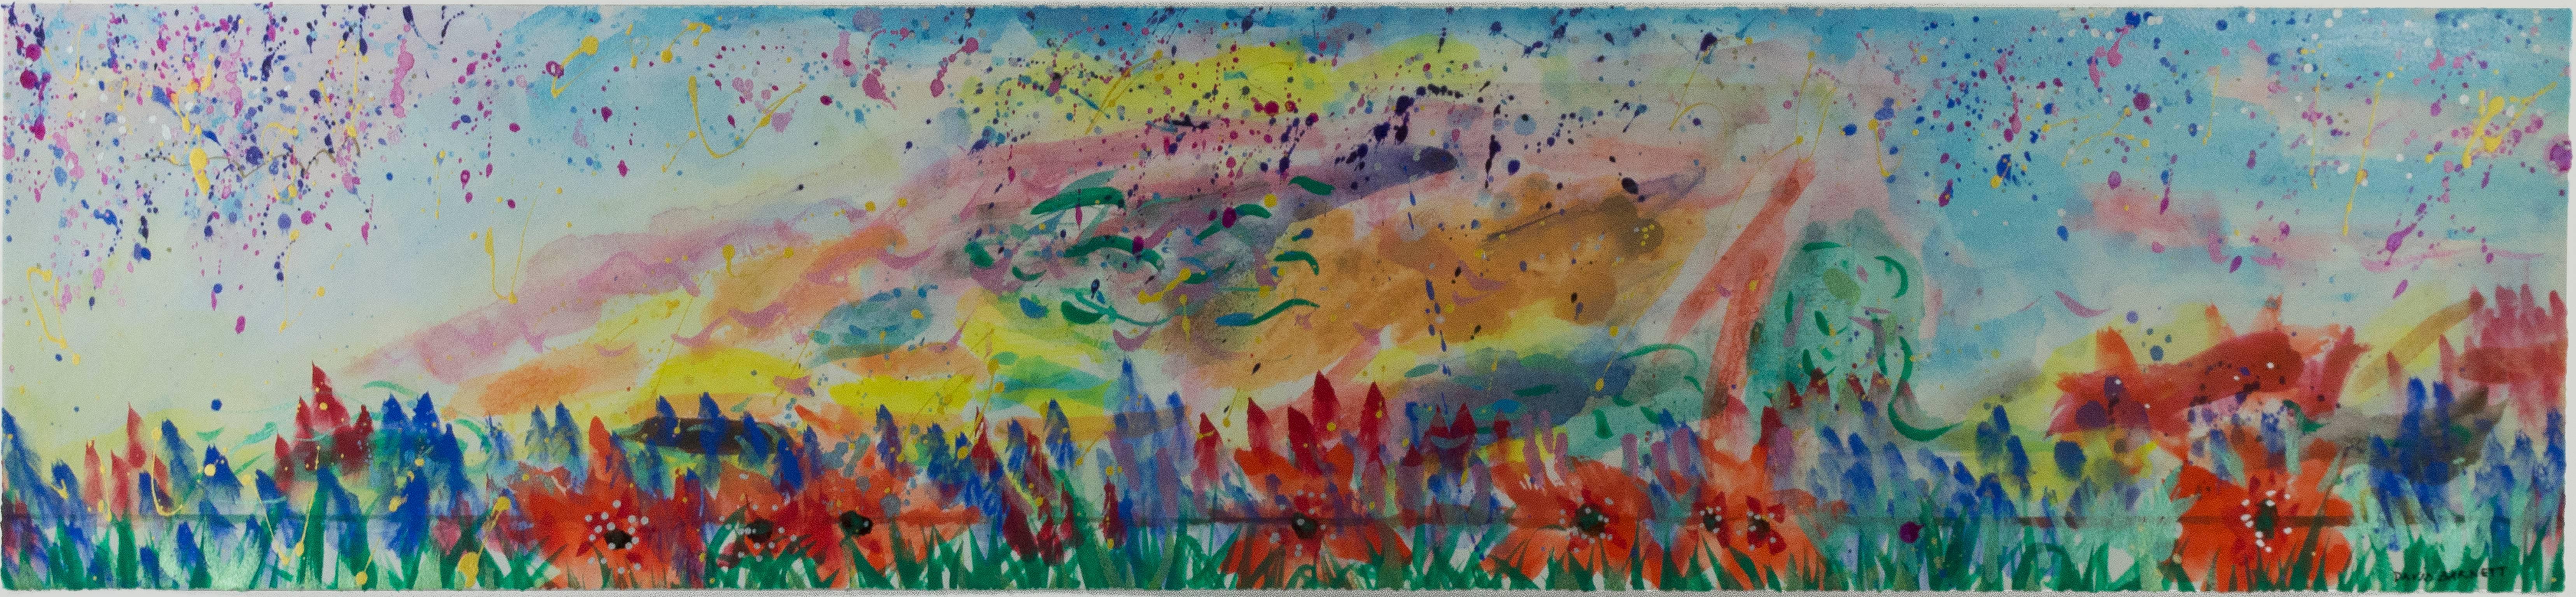 « Abstract with Grass and Poppies II » (Abstract with Grass and Poppies II), paysage multimédia de David Barnett